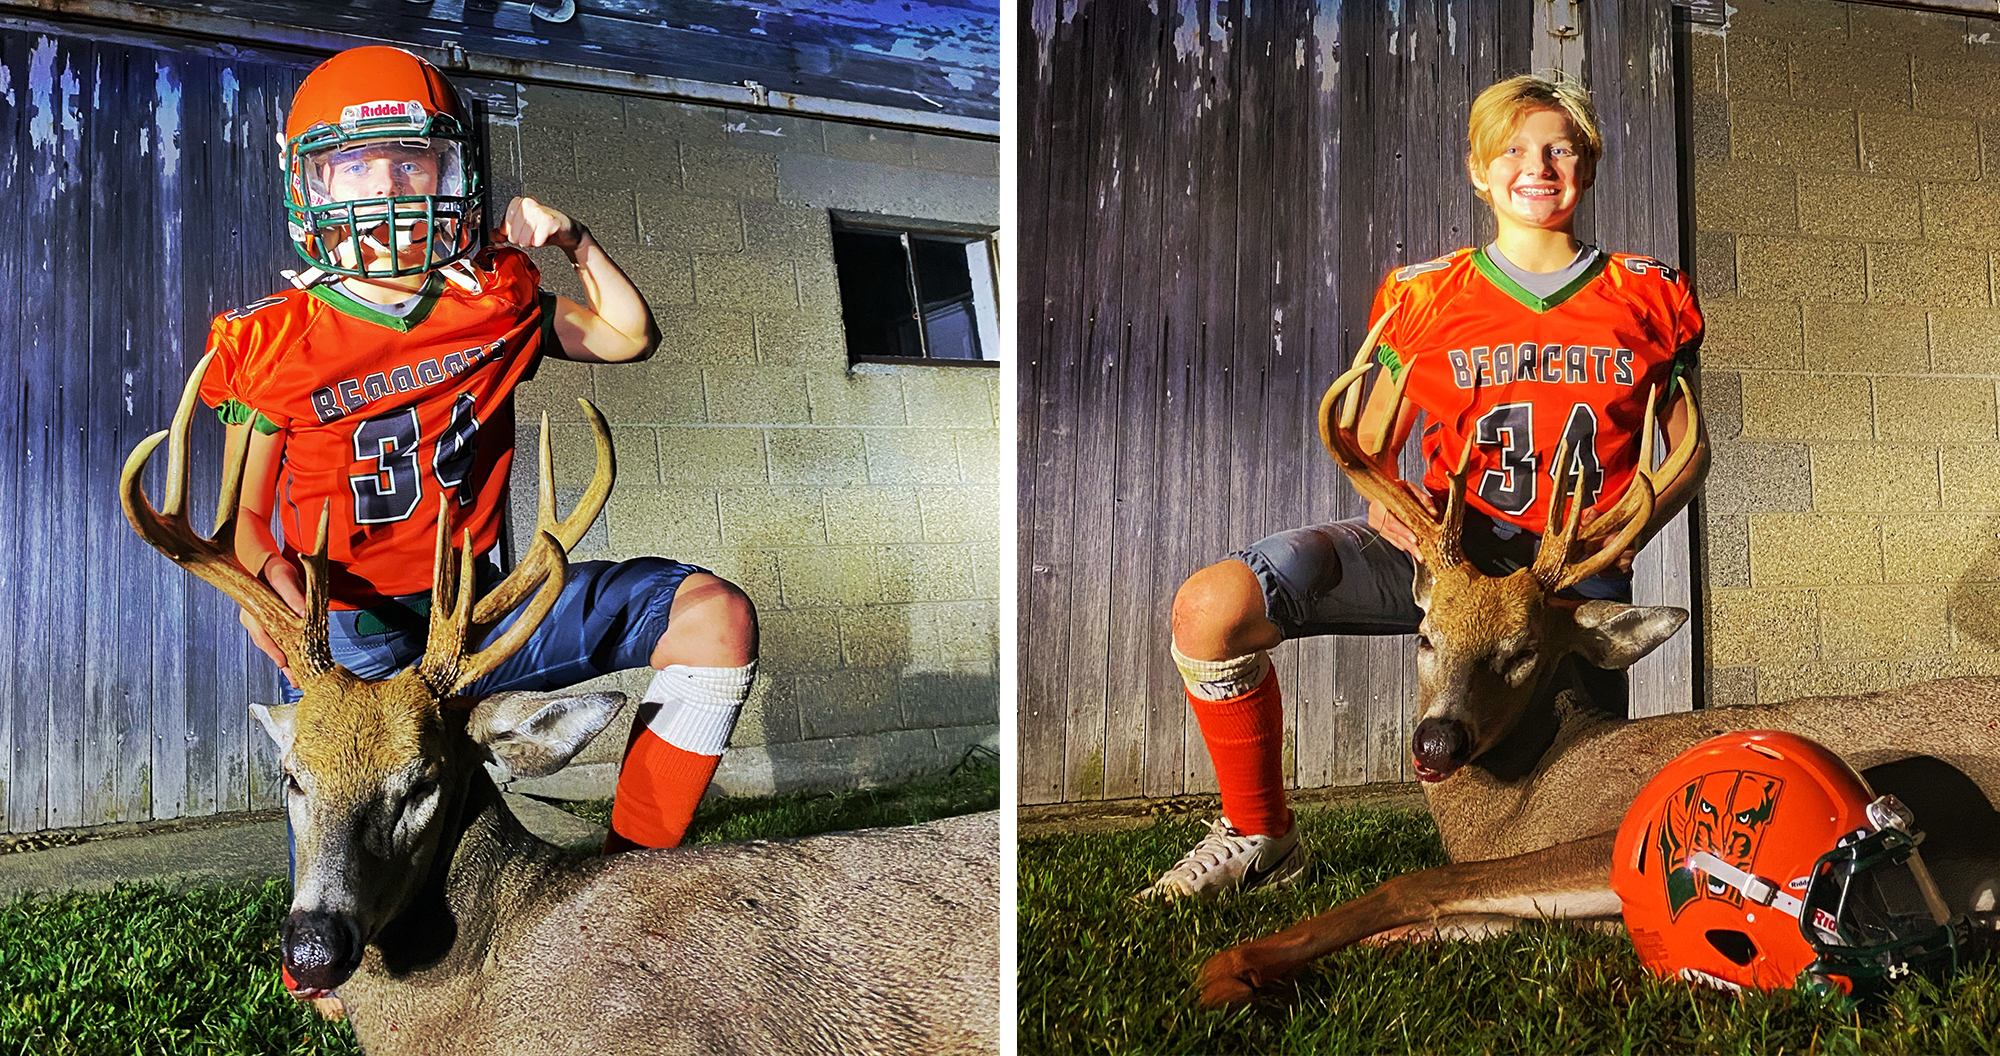 A young football player from Indiana shot a nice deer after his game.